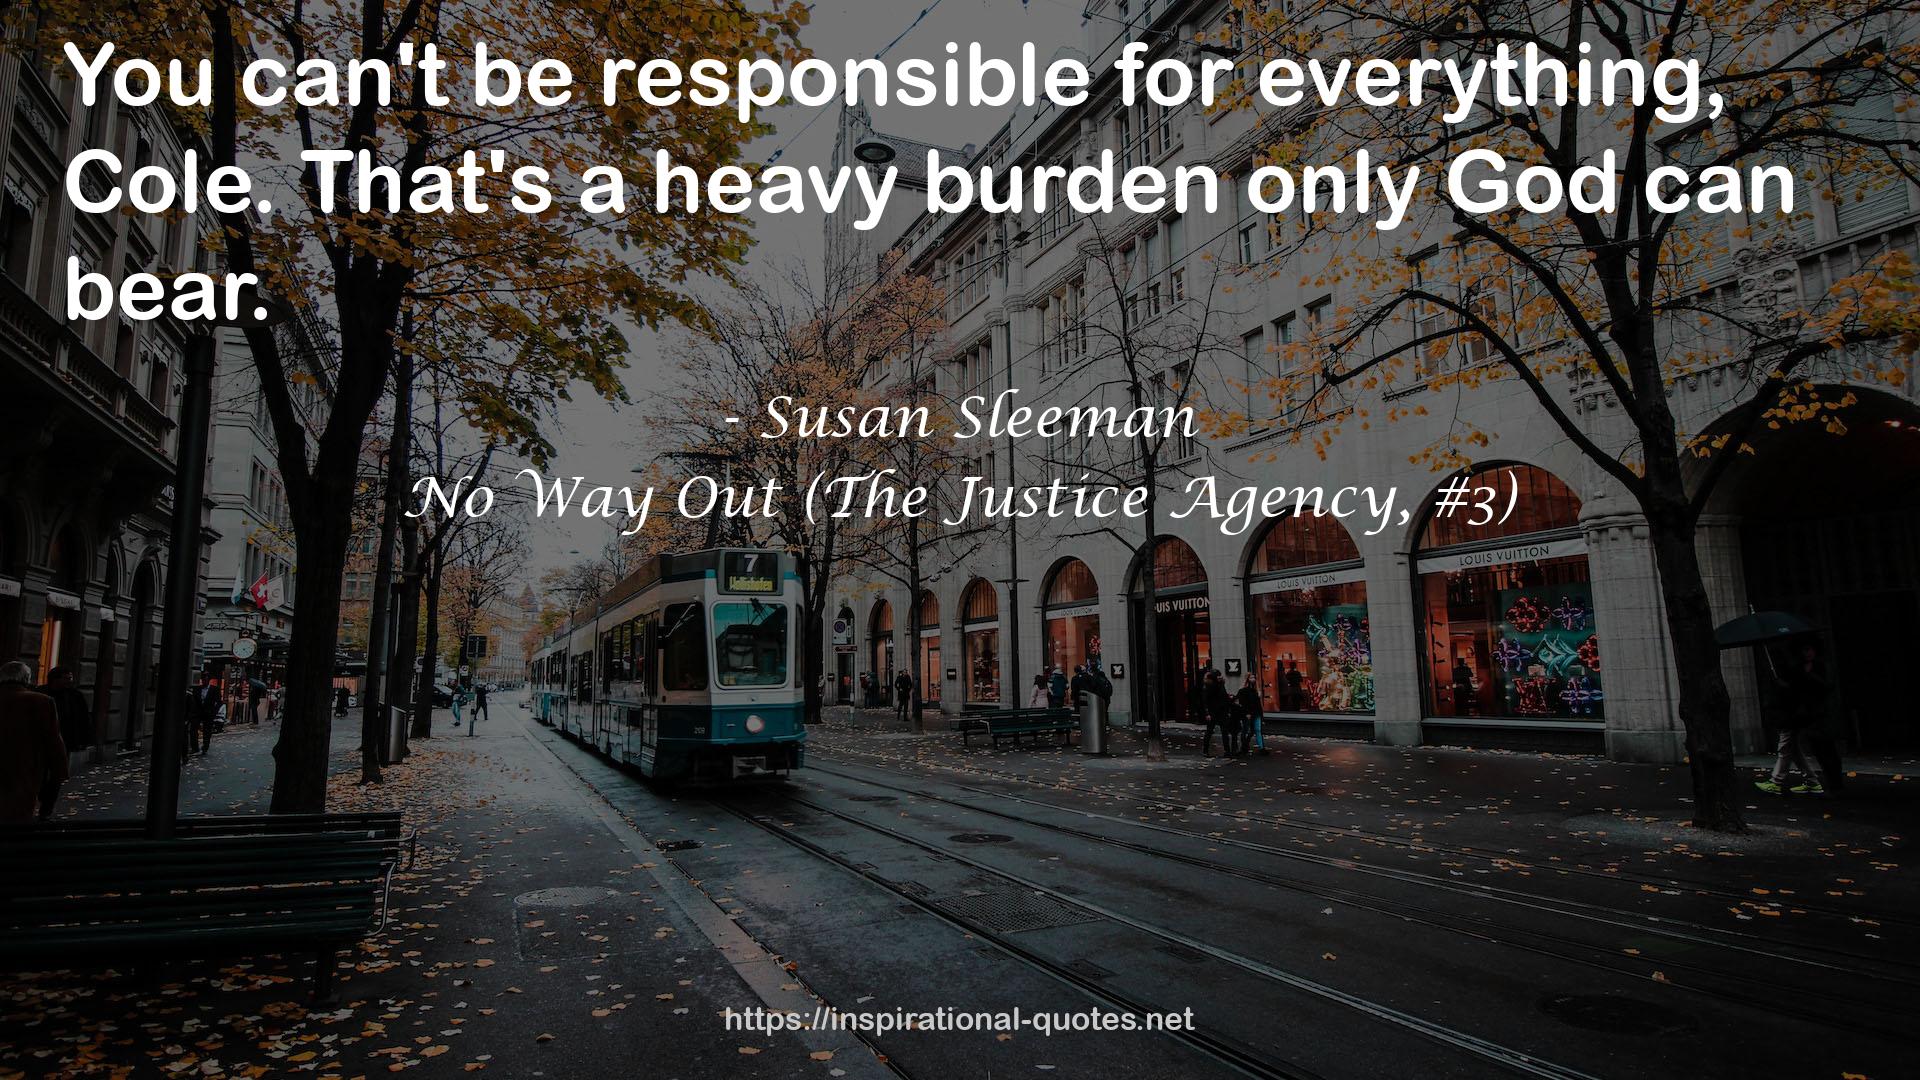 No Way Out (The Justice Agency, #3) QUOTES